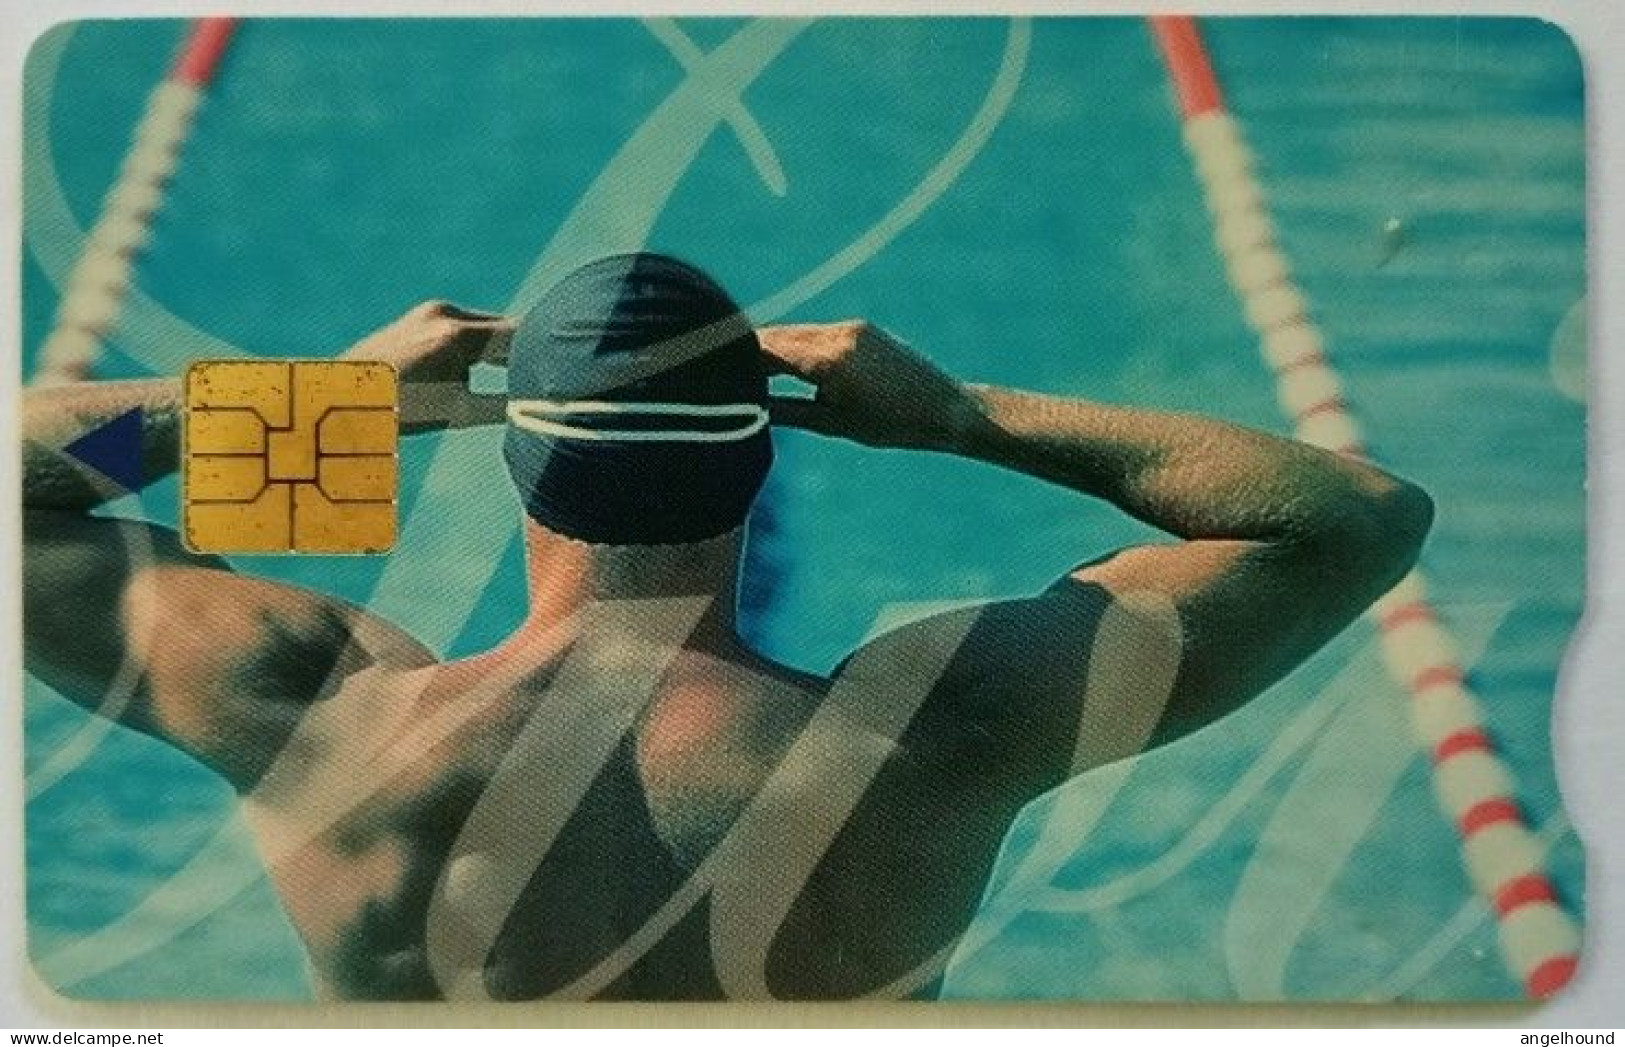 South Africa R20 Chip Card - Swimmer 3 -Preparing - South Africa